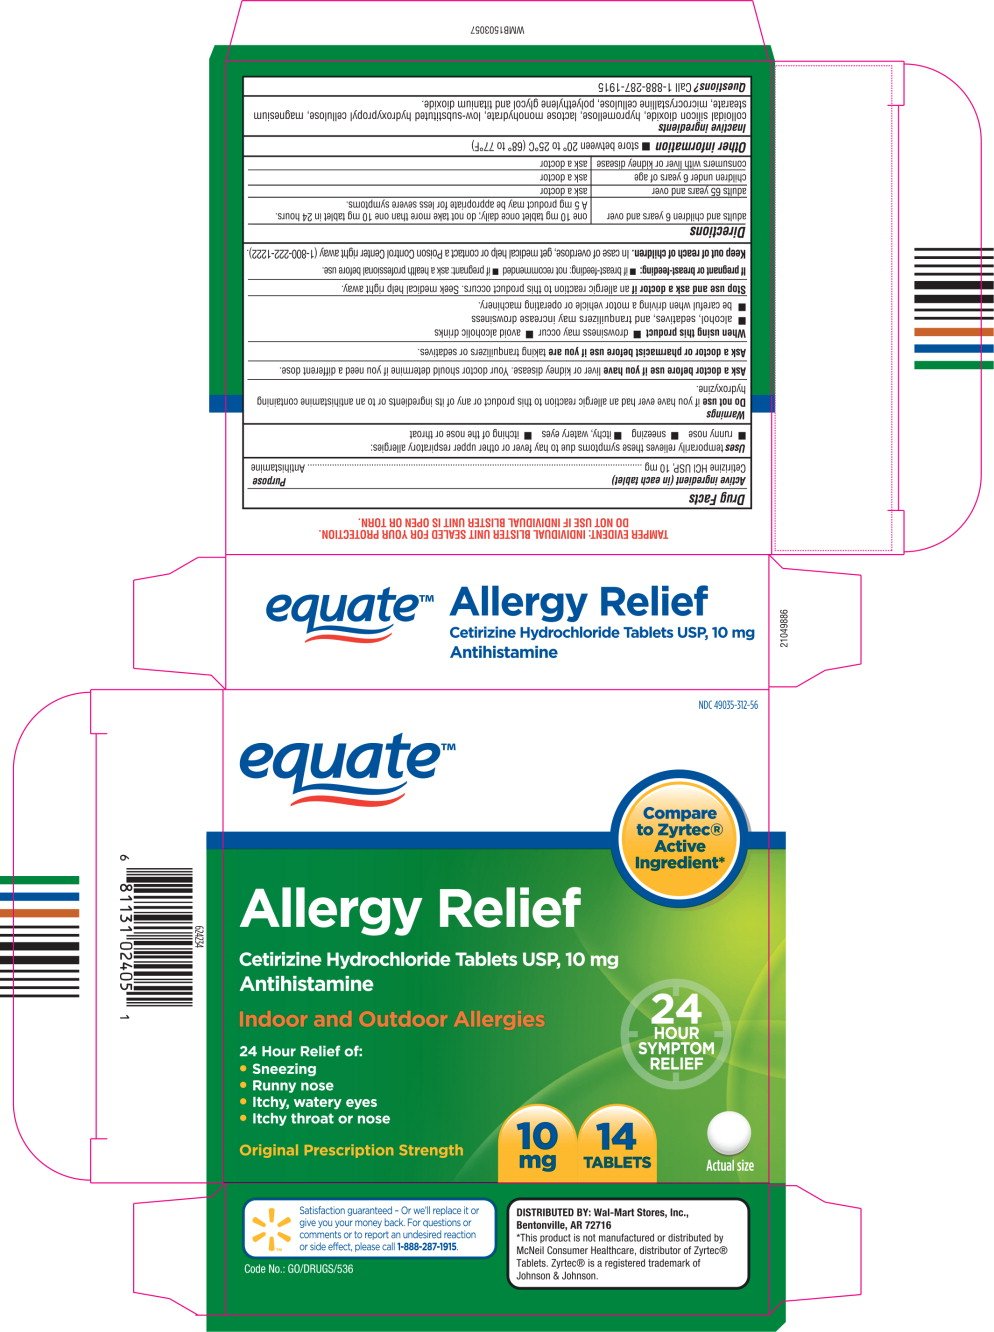 Equate Children S Allergy Relief Dosage Chart